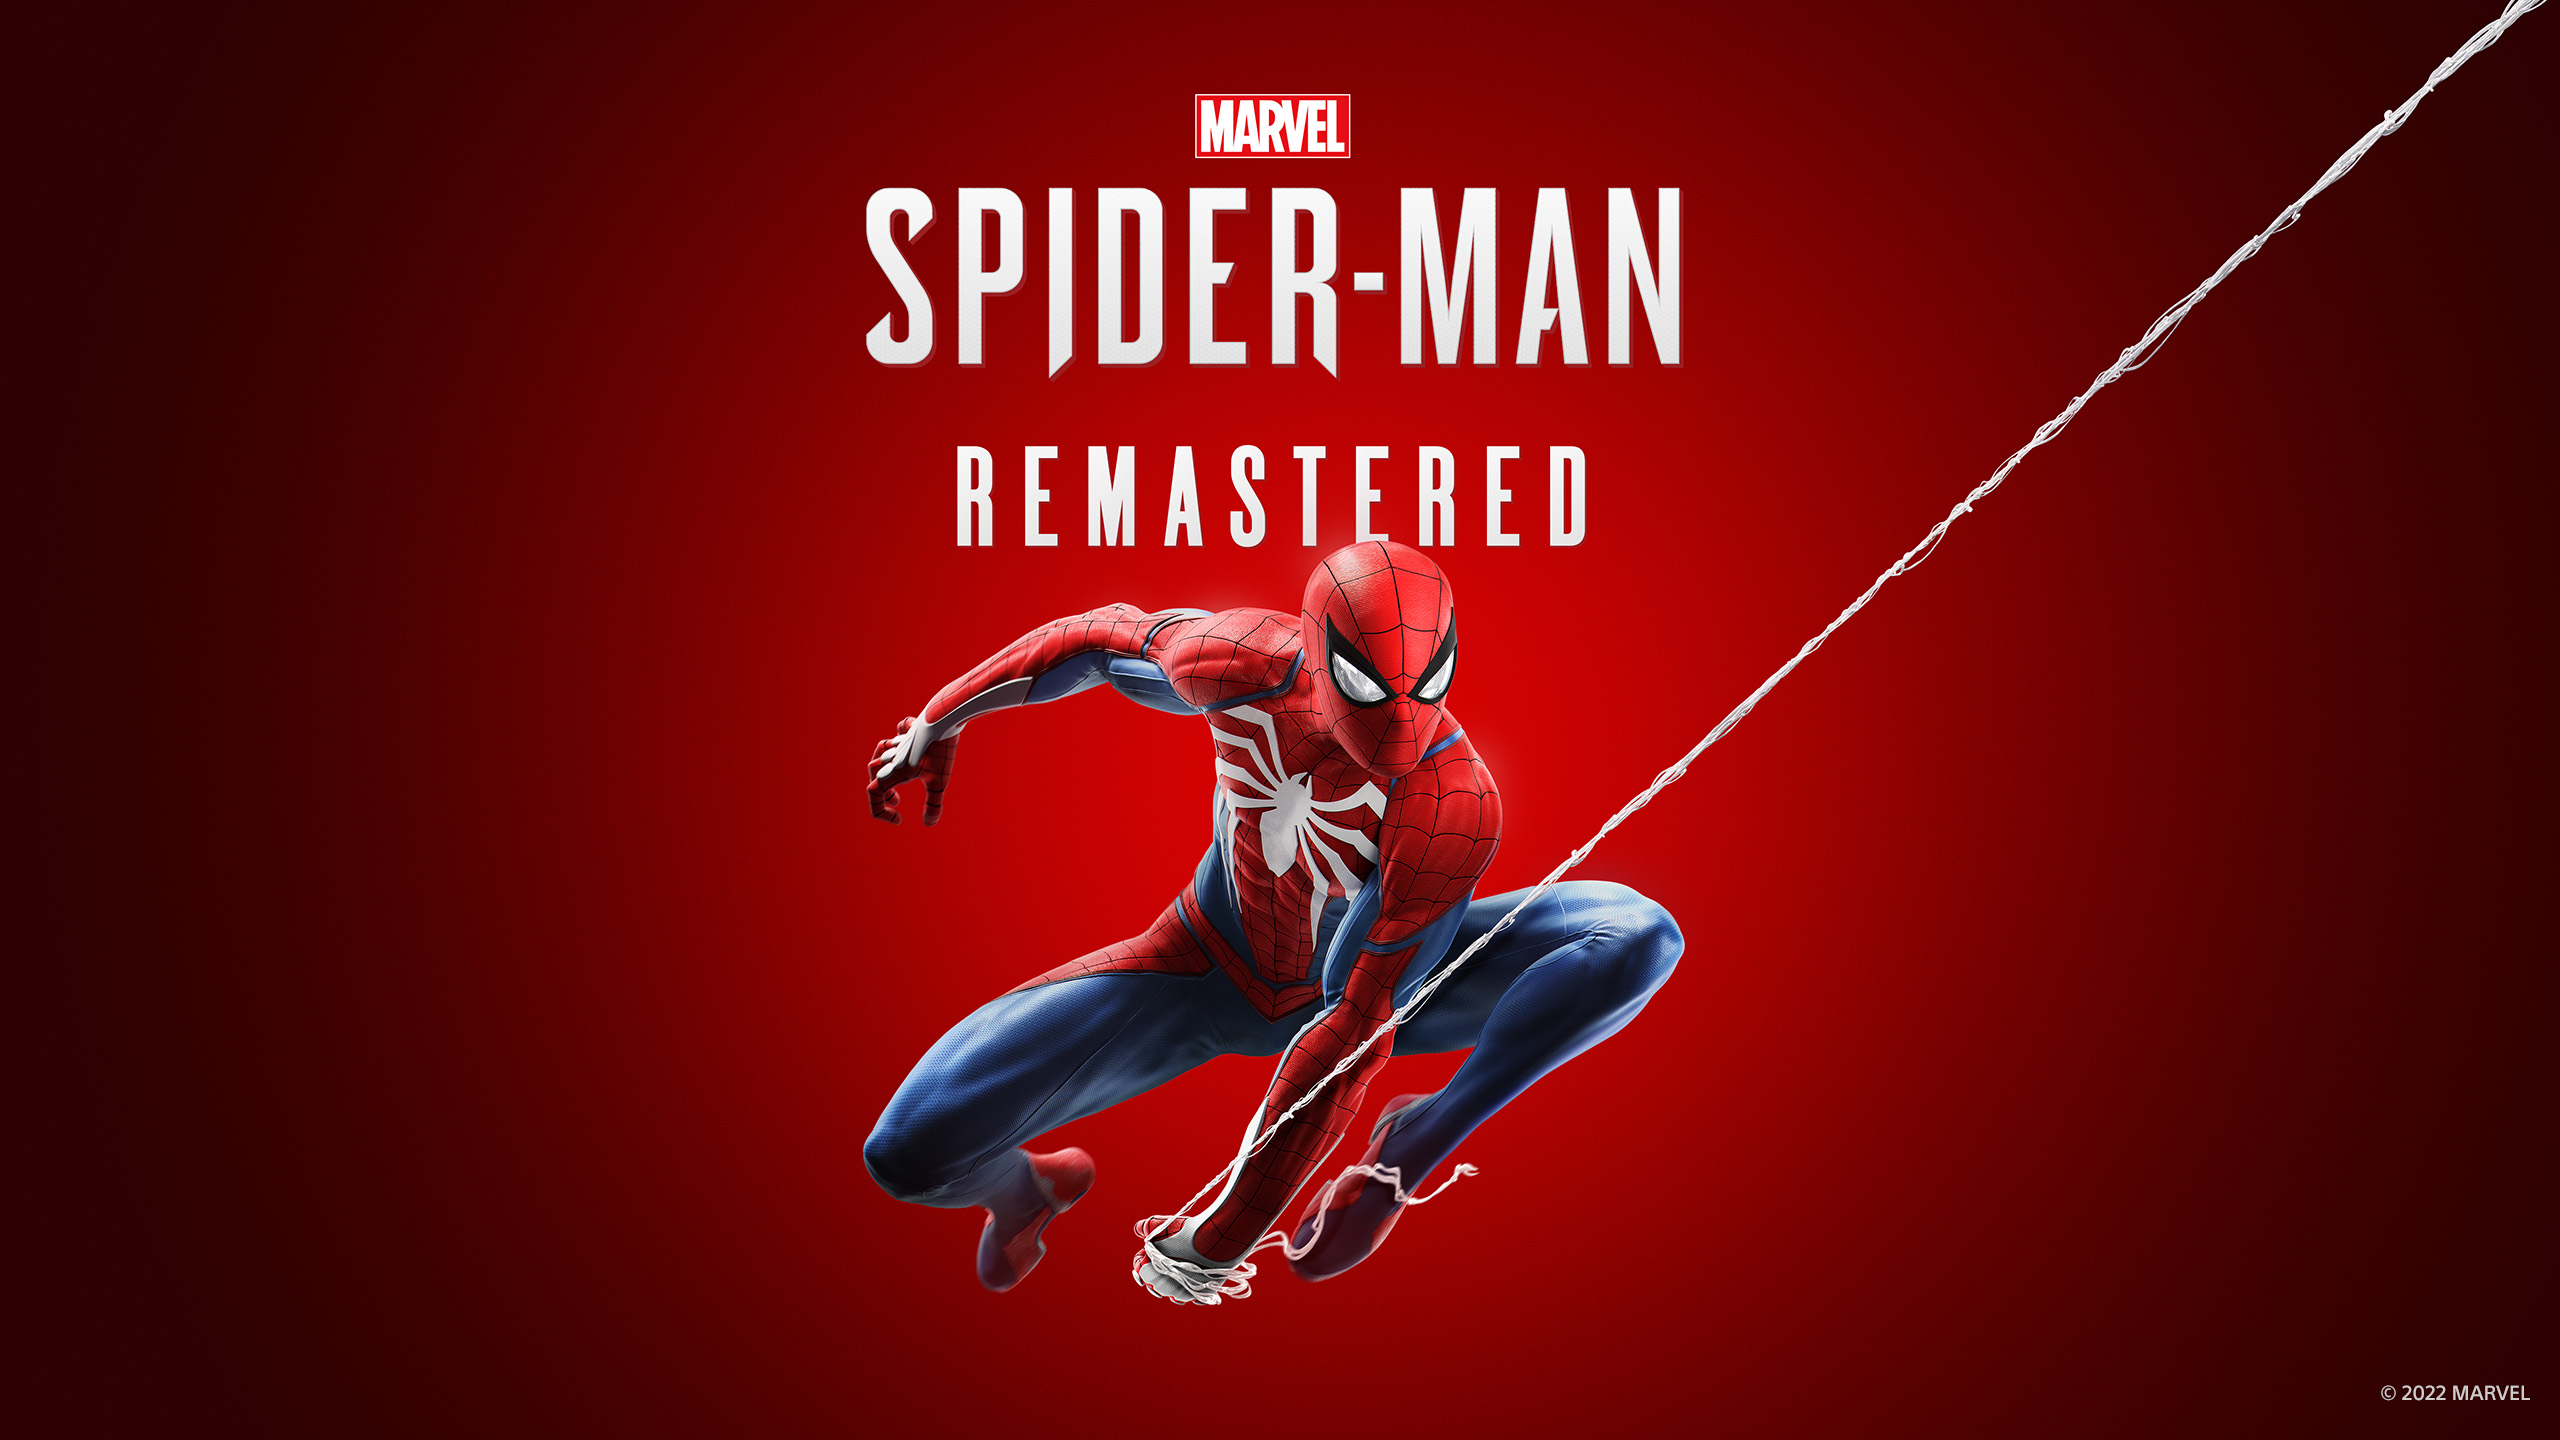 Marvel’s Spider-Man Remastered PC Game Latest Version Free Download